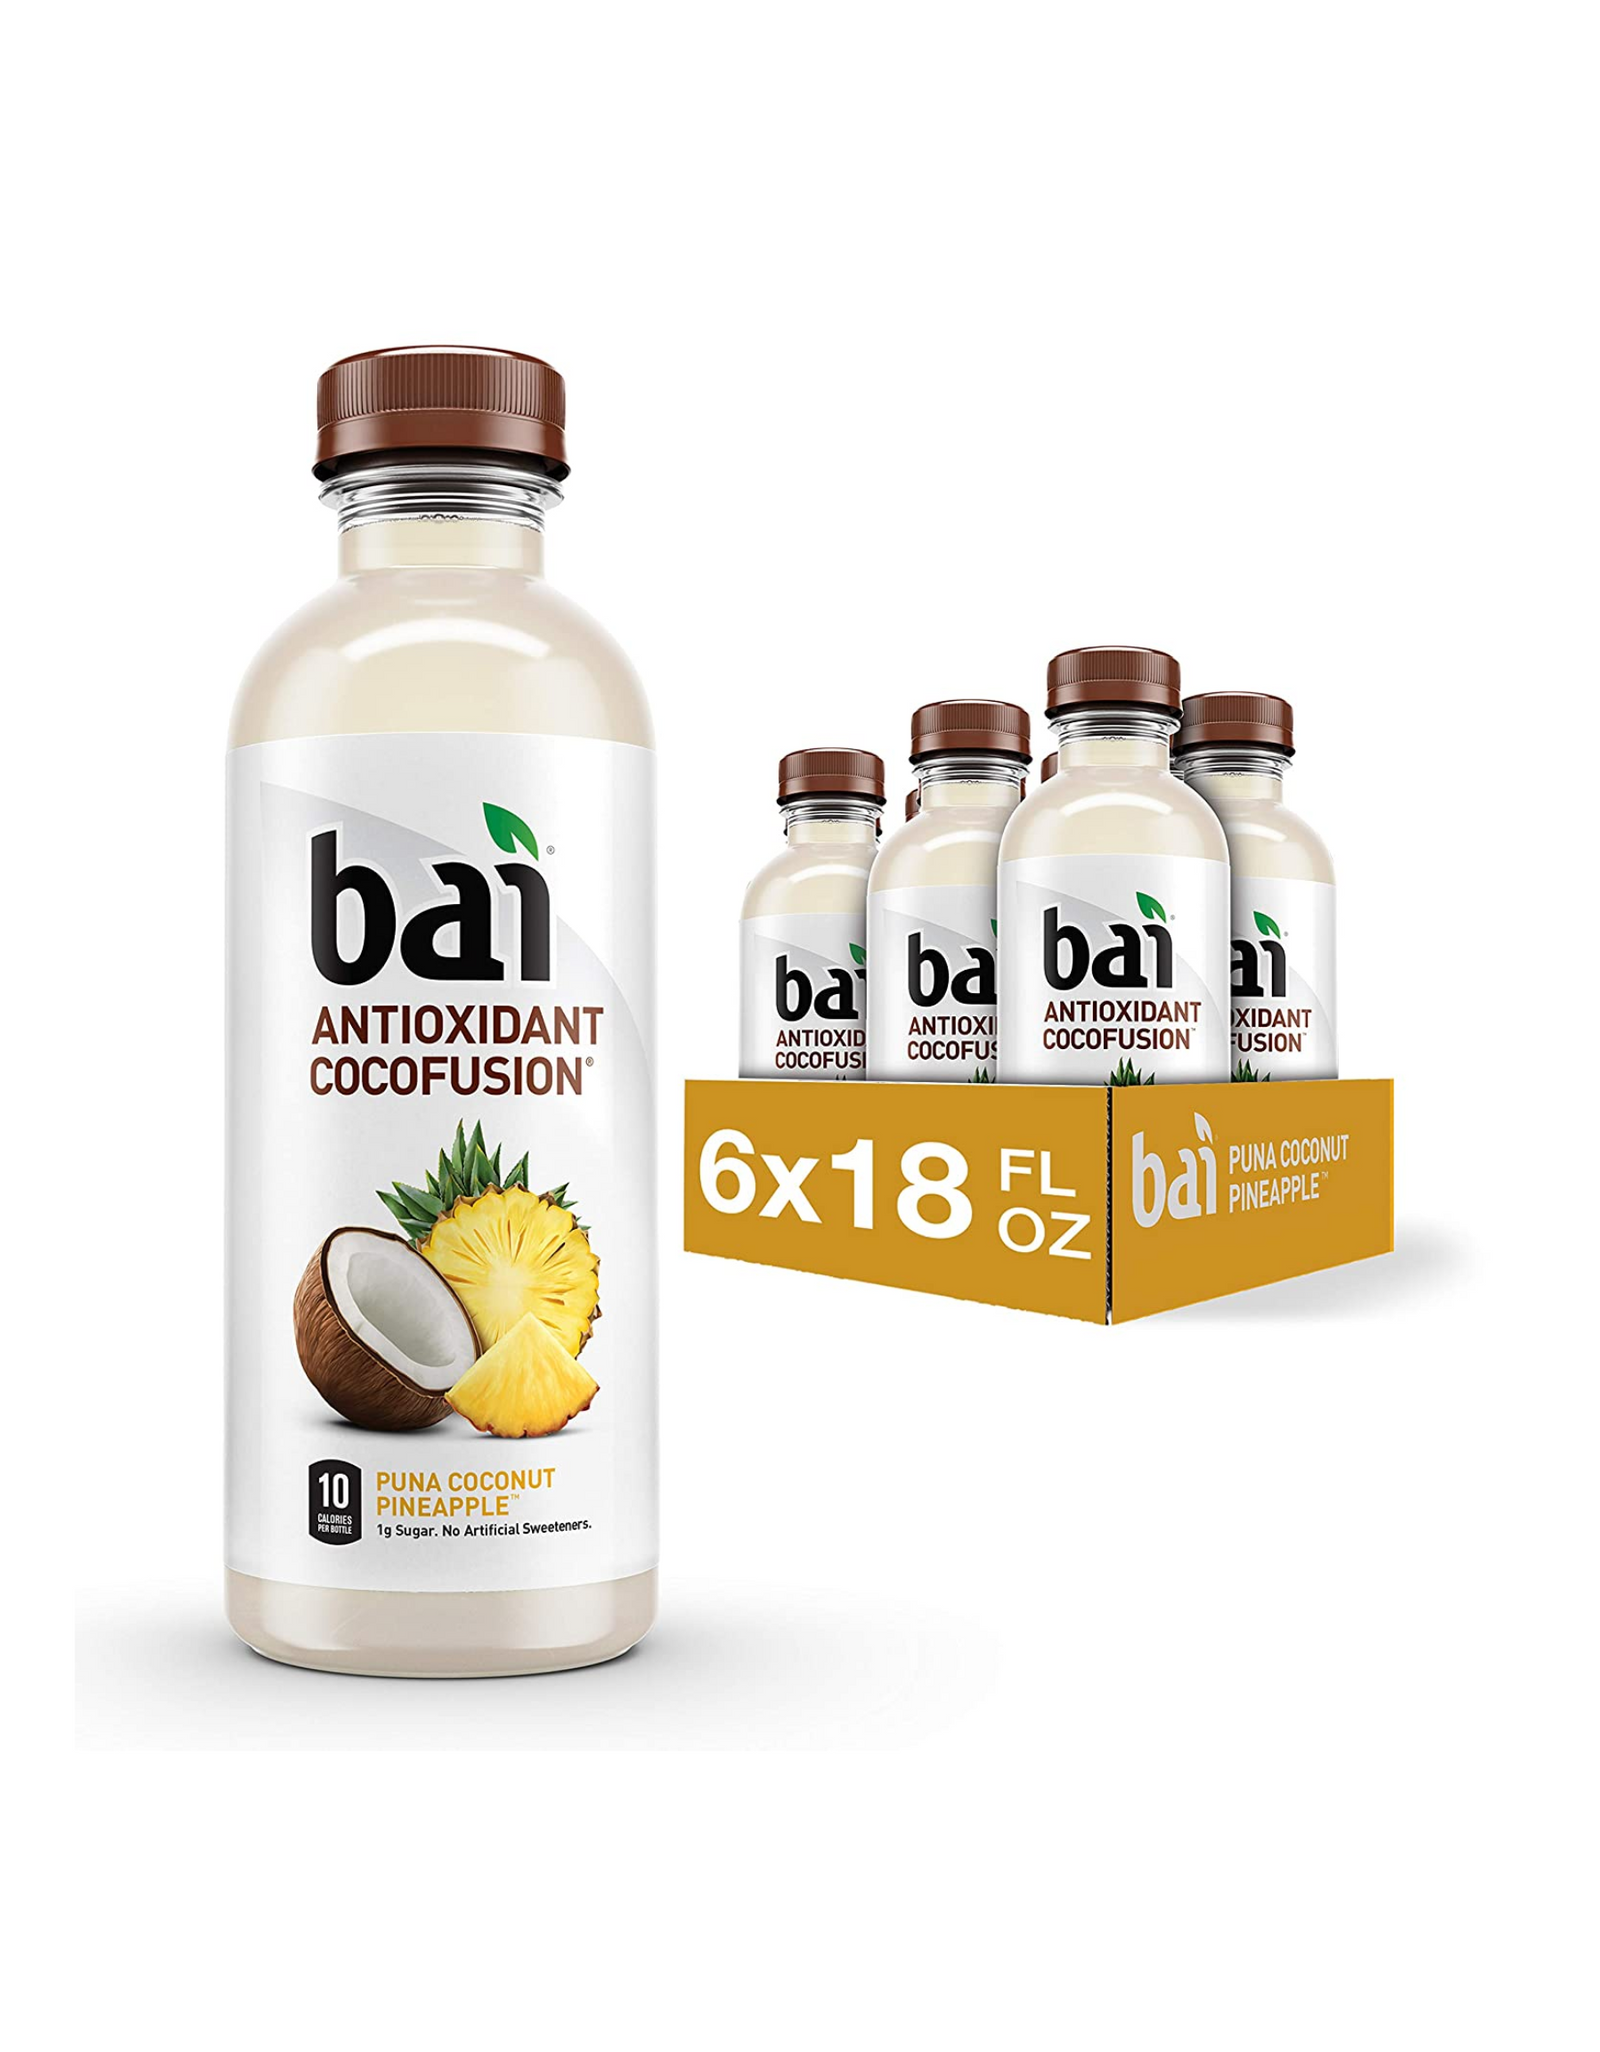 Bai Coconut Flavored Water, Antioxidant Cocofusion, Puna Coconut Pineapple, 18 fl oz (Pack of 6)